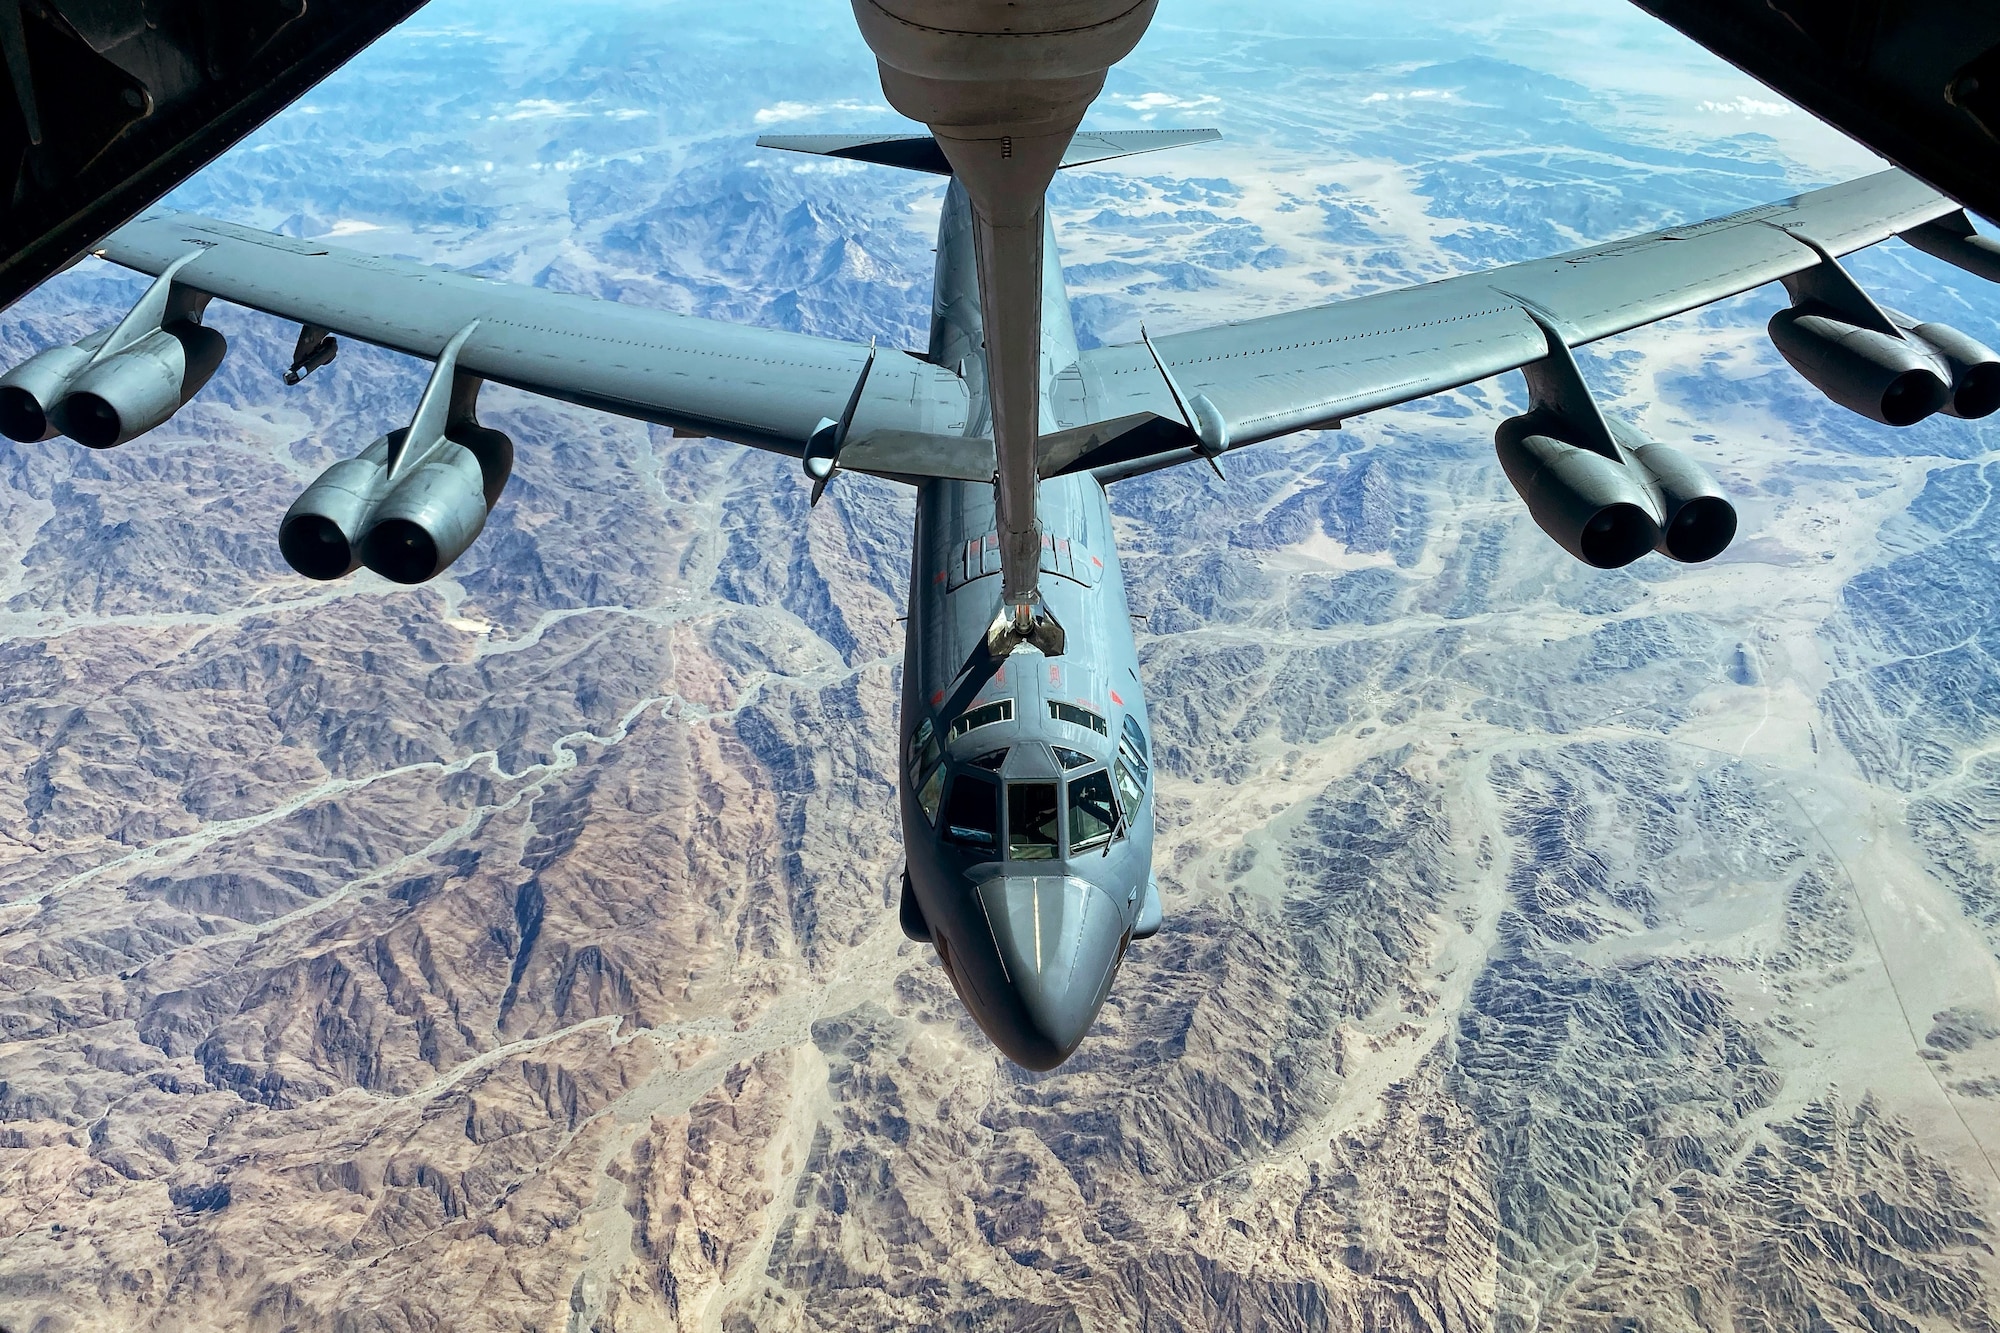 A U.S. Air Force B-52H Stratofortress from Barksdale Air Force Base, La., is refueled by a U.S. Air Force KC-10 Extender assigned to the 908th Expeditionary Air Refueling Squadron, during a Bomber Task Force mission over the U.S. Central Command area of responsibility, Nov. 10, 2022. The bomber deployment showcases the U.S. military’s commitment to regional security and demonstrates the capabilities of a short-notice, rapid deployment of assets. The B-52 is a long-range, heavy bomber, capable of flying high subsonic speeds at altitudes up to 50,000 feet providing the U.S., coalition and partner forces with a global strike capability to deter conflict while credibly demonstrating the U.S.’s ability to address a global security environment. (U.S. Air Force photo by Staff Sgt. Gerald R. Willis)